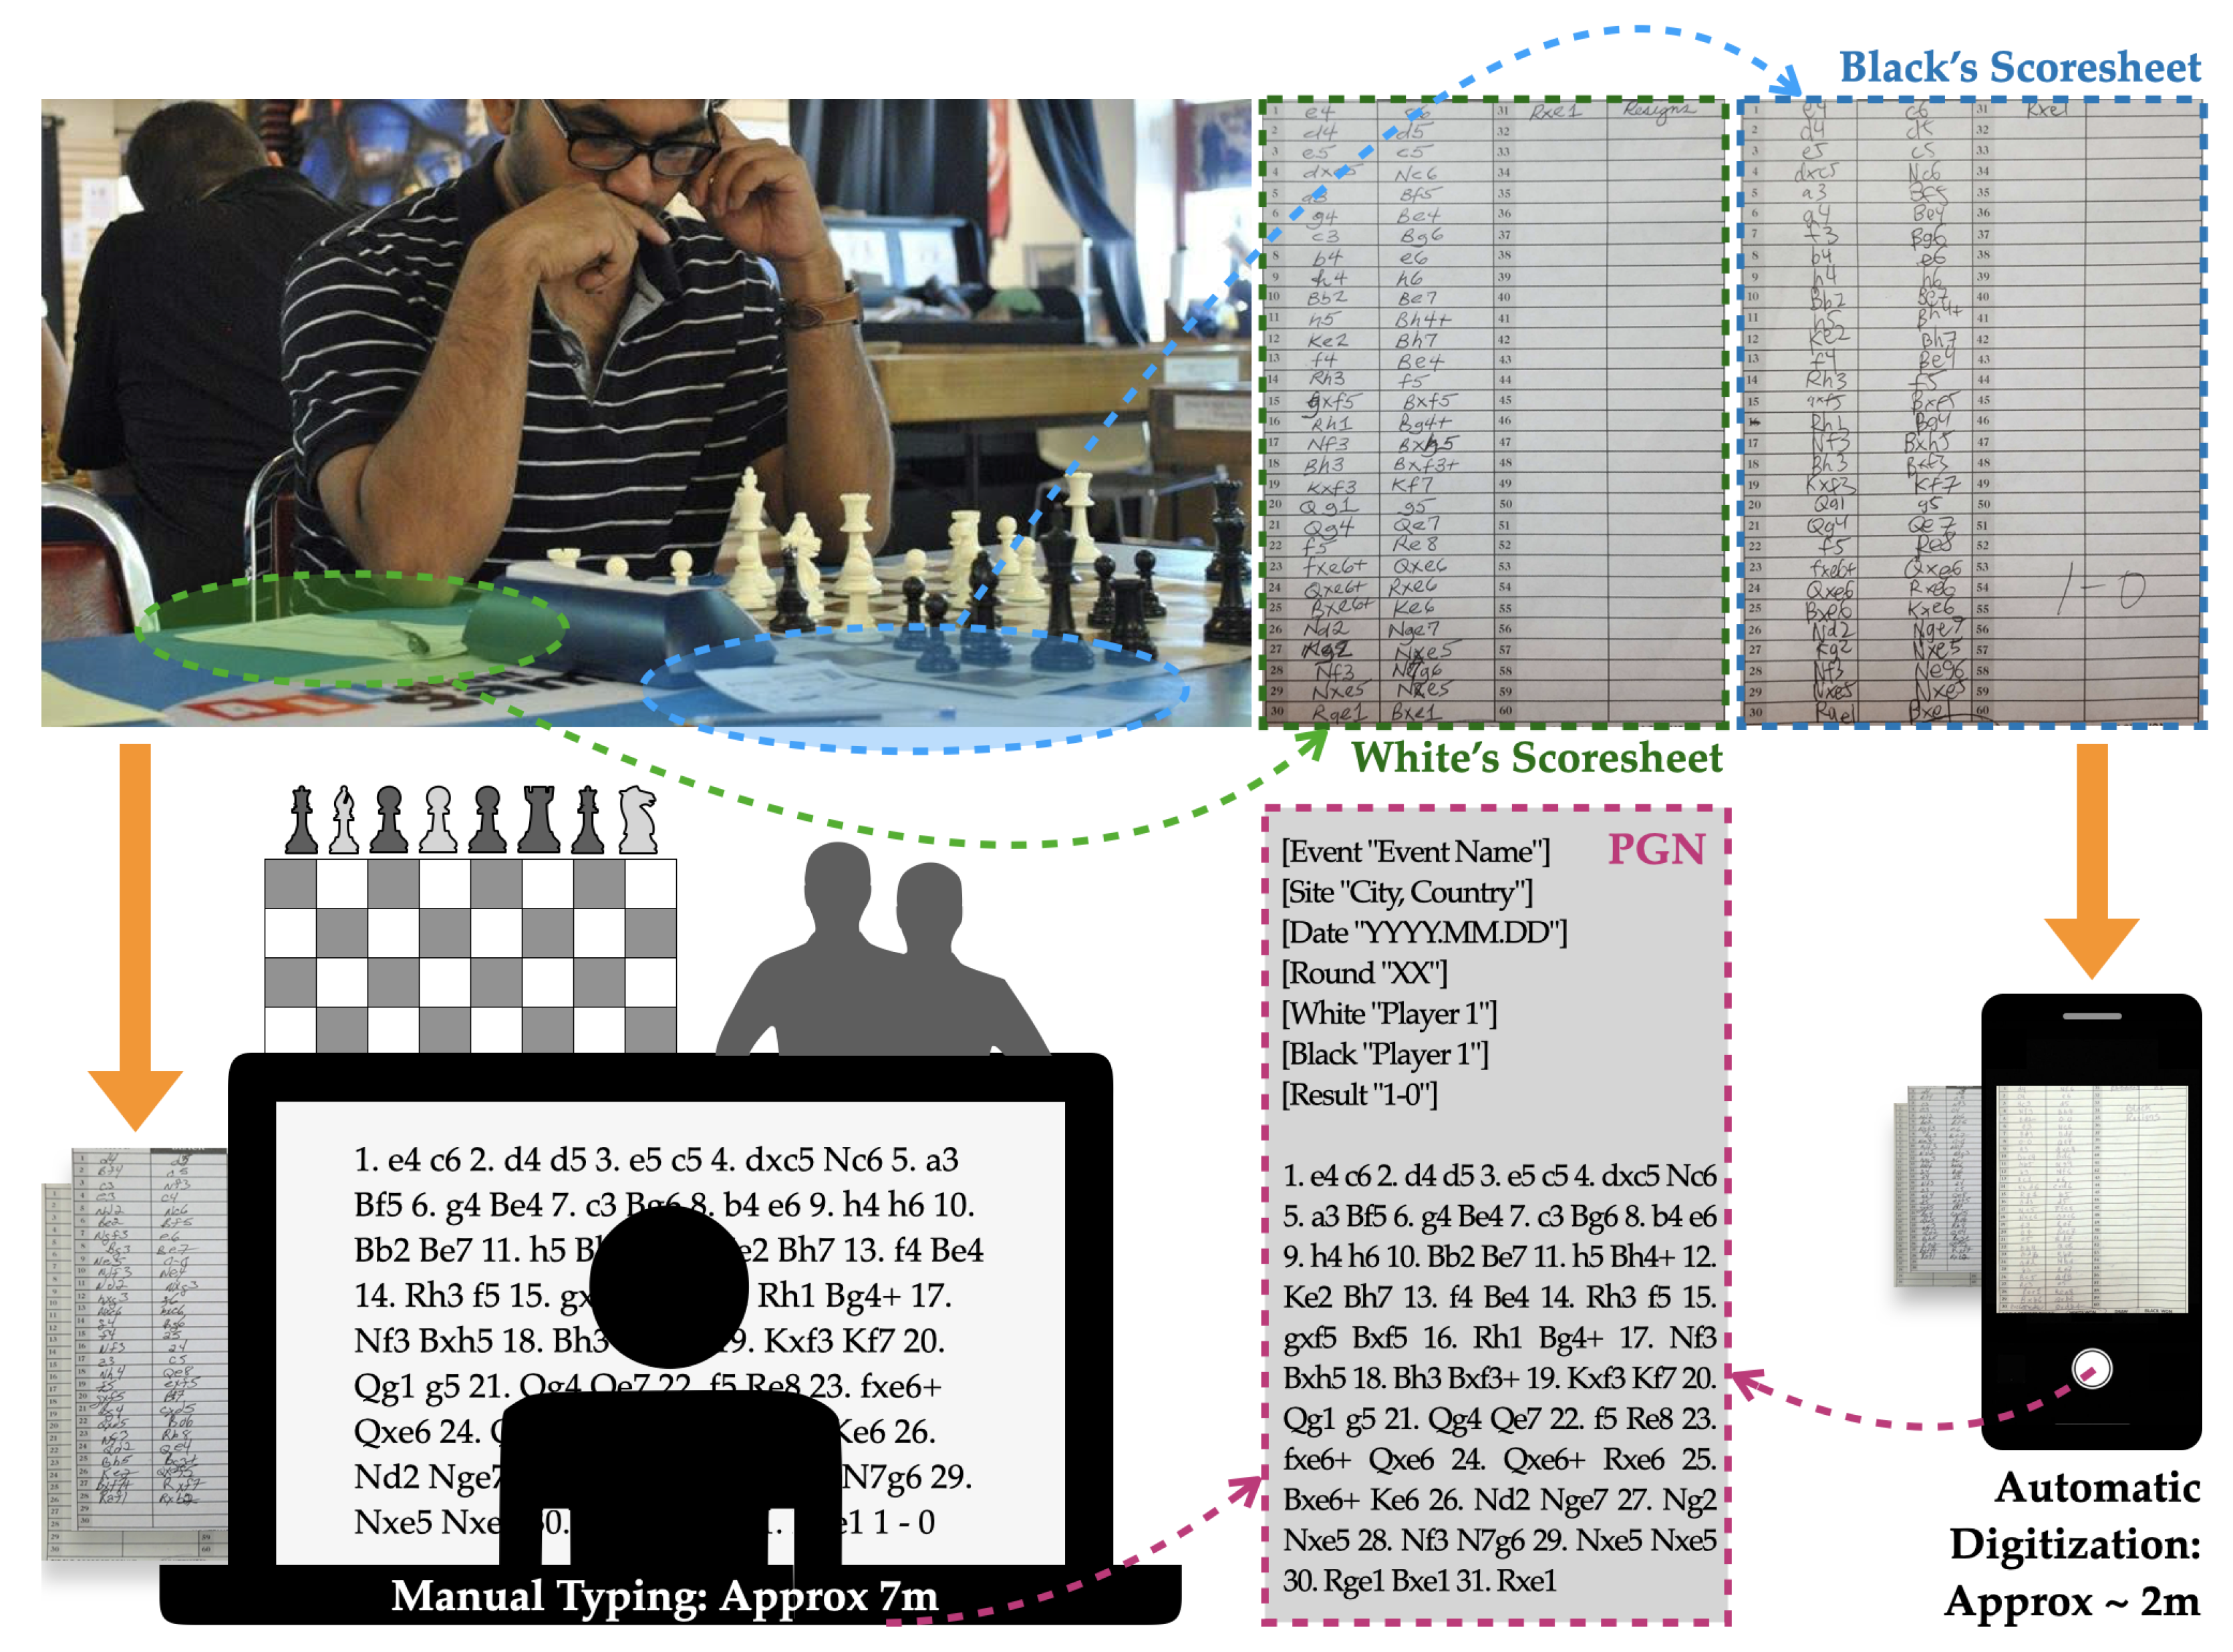 Download chart of chess pieces in pdf